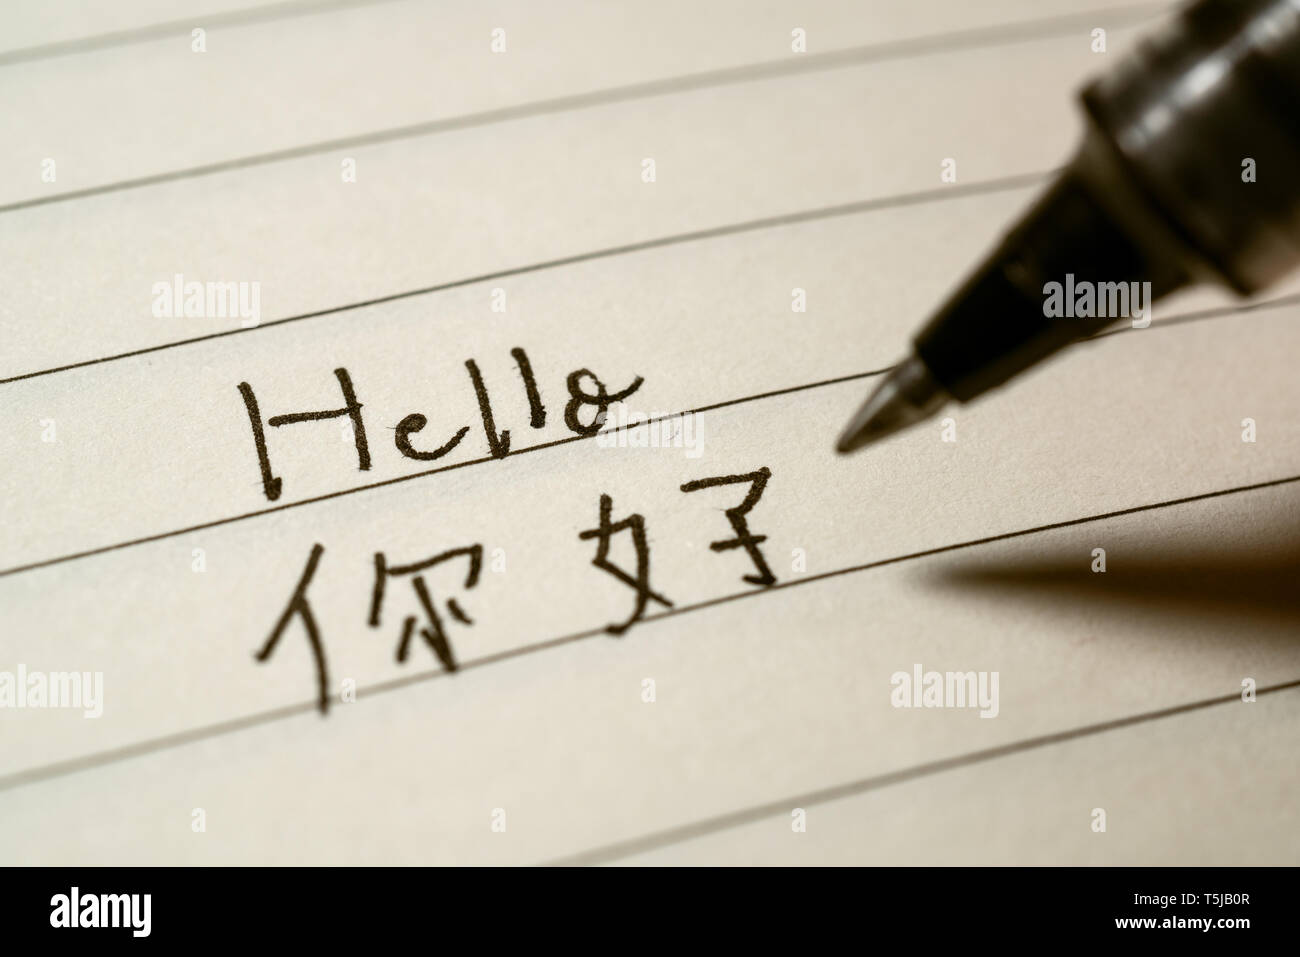 Beginner Chinese language learner writing Hello word Nihao in Chinese characters on a notebook close-up shot Stock Photo